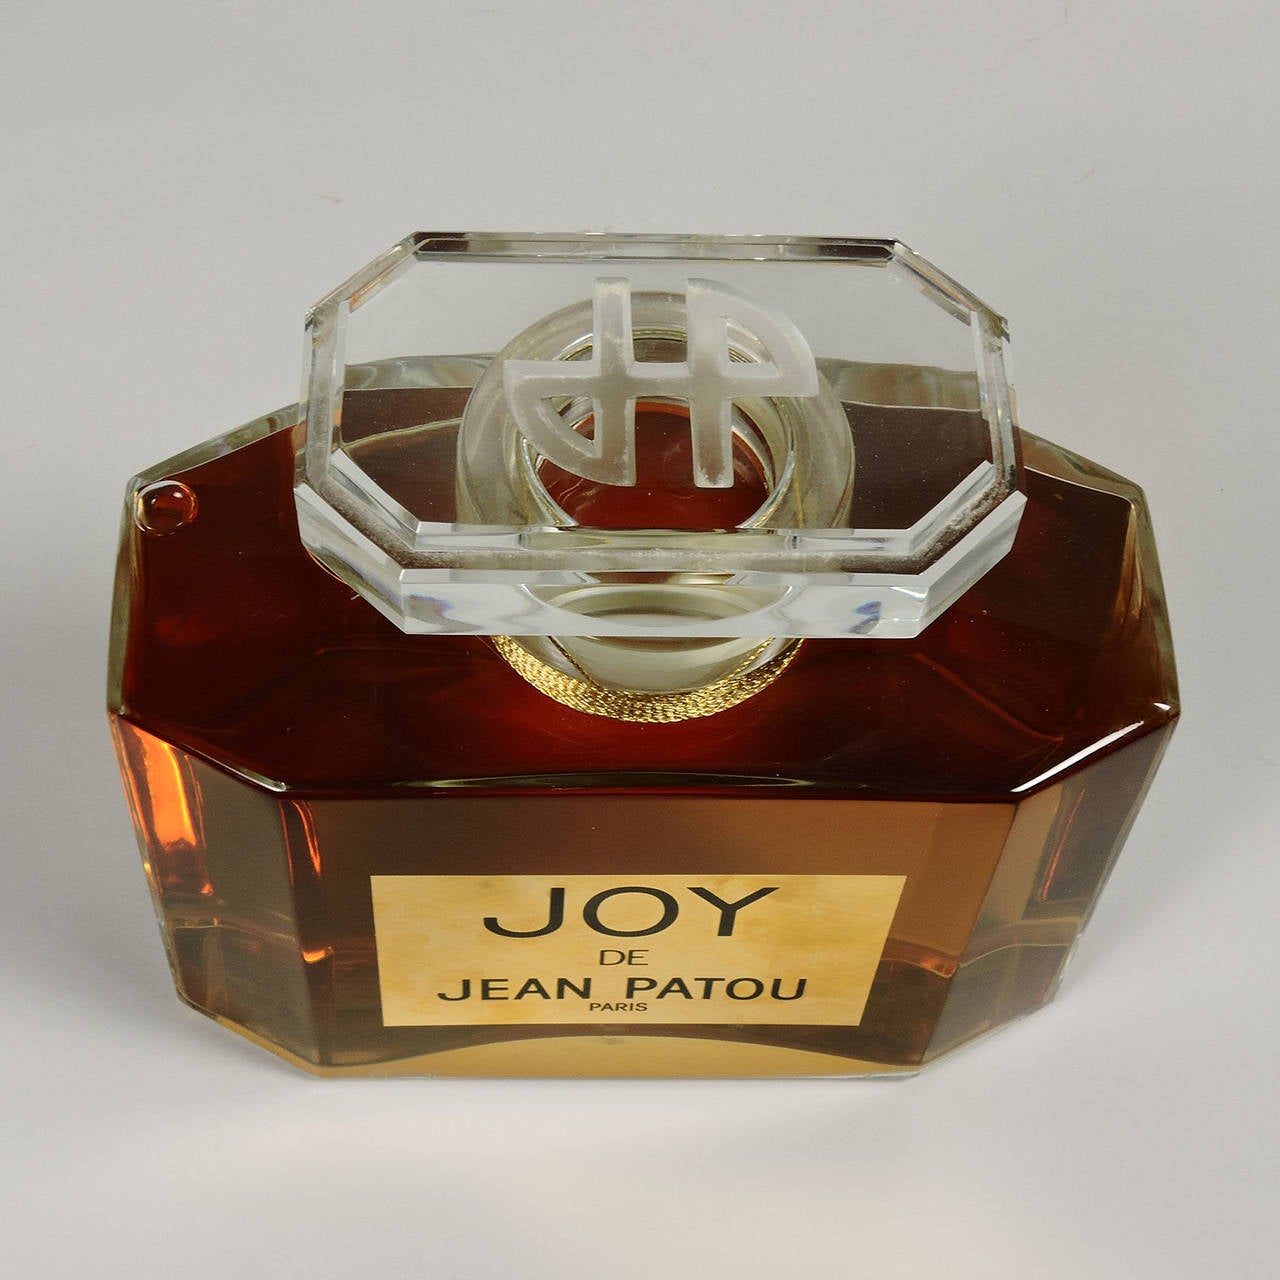 Large Joy de Jean Patou Retail Display Perfume Factice Bottle, 20th century.  Containing colored water and marked 